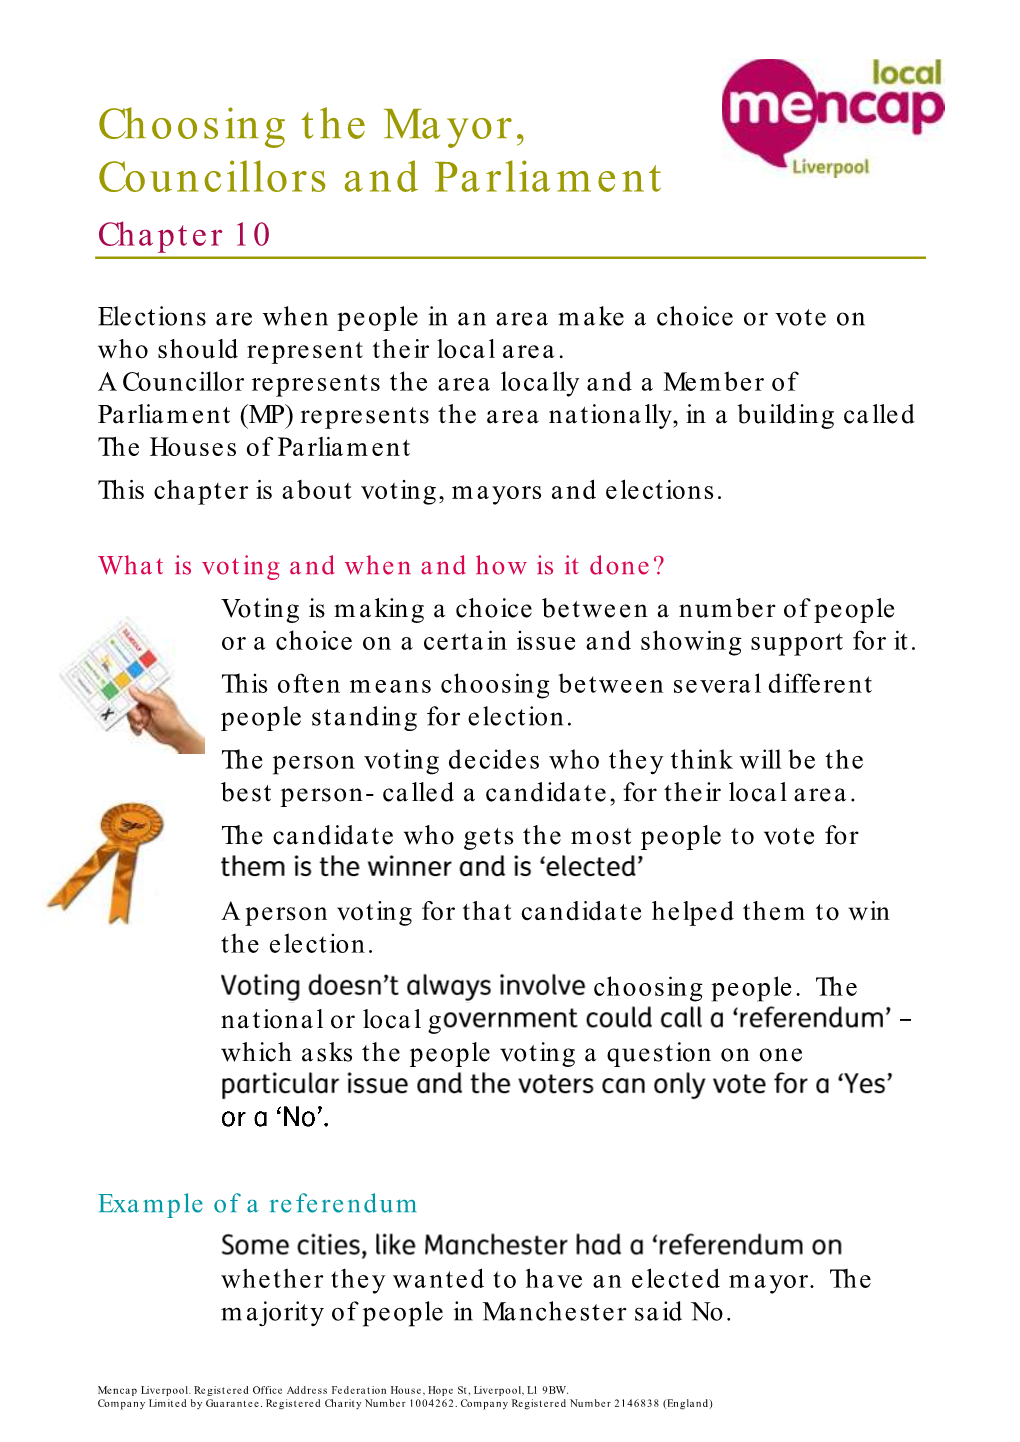 Choosing the Mayor, Councillors and Parliament Chapter 10